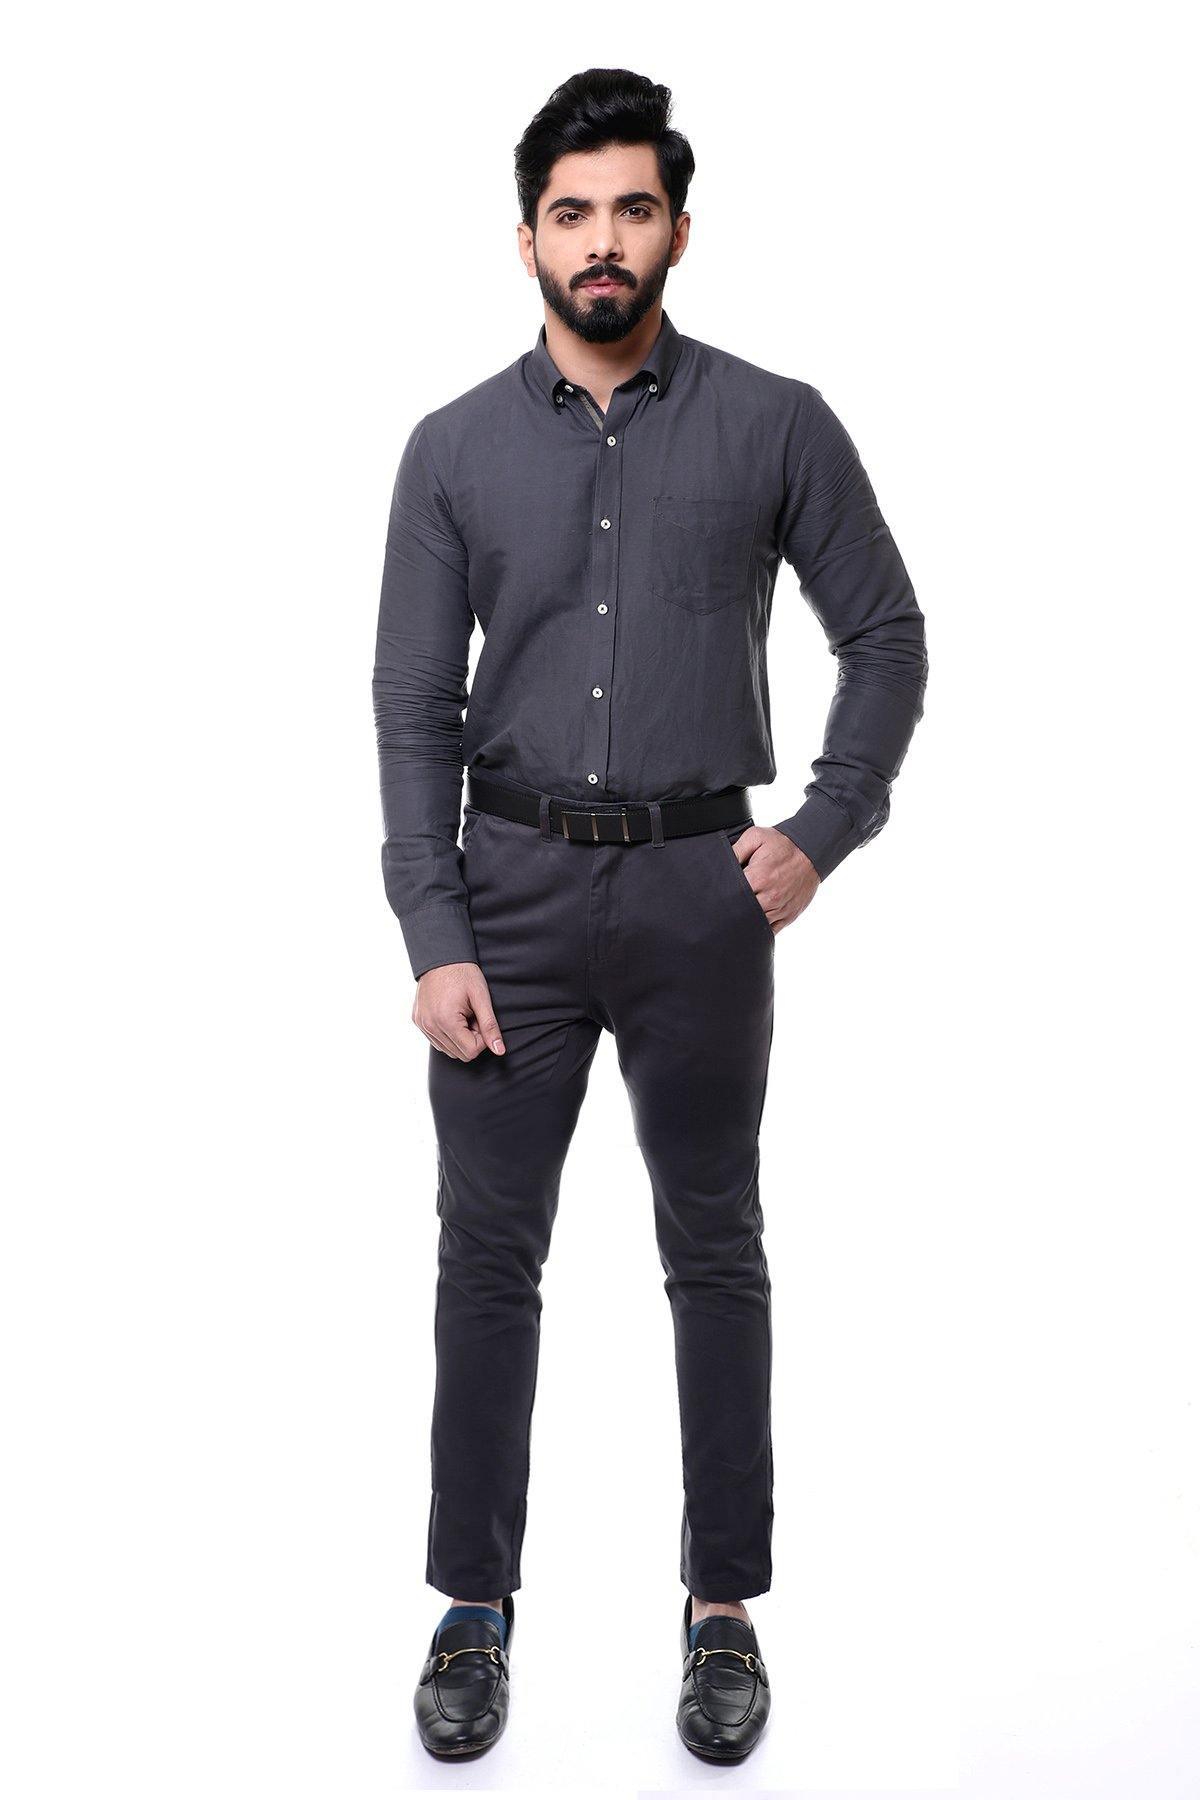 SMART SHIRT FULL SLEEVE BUTTON DOWN DARK GREY at Charcoal Clothing